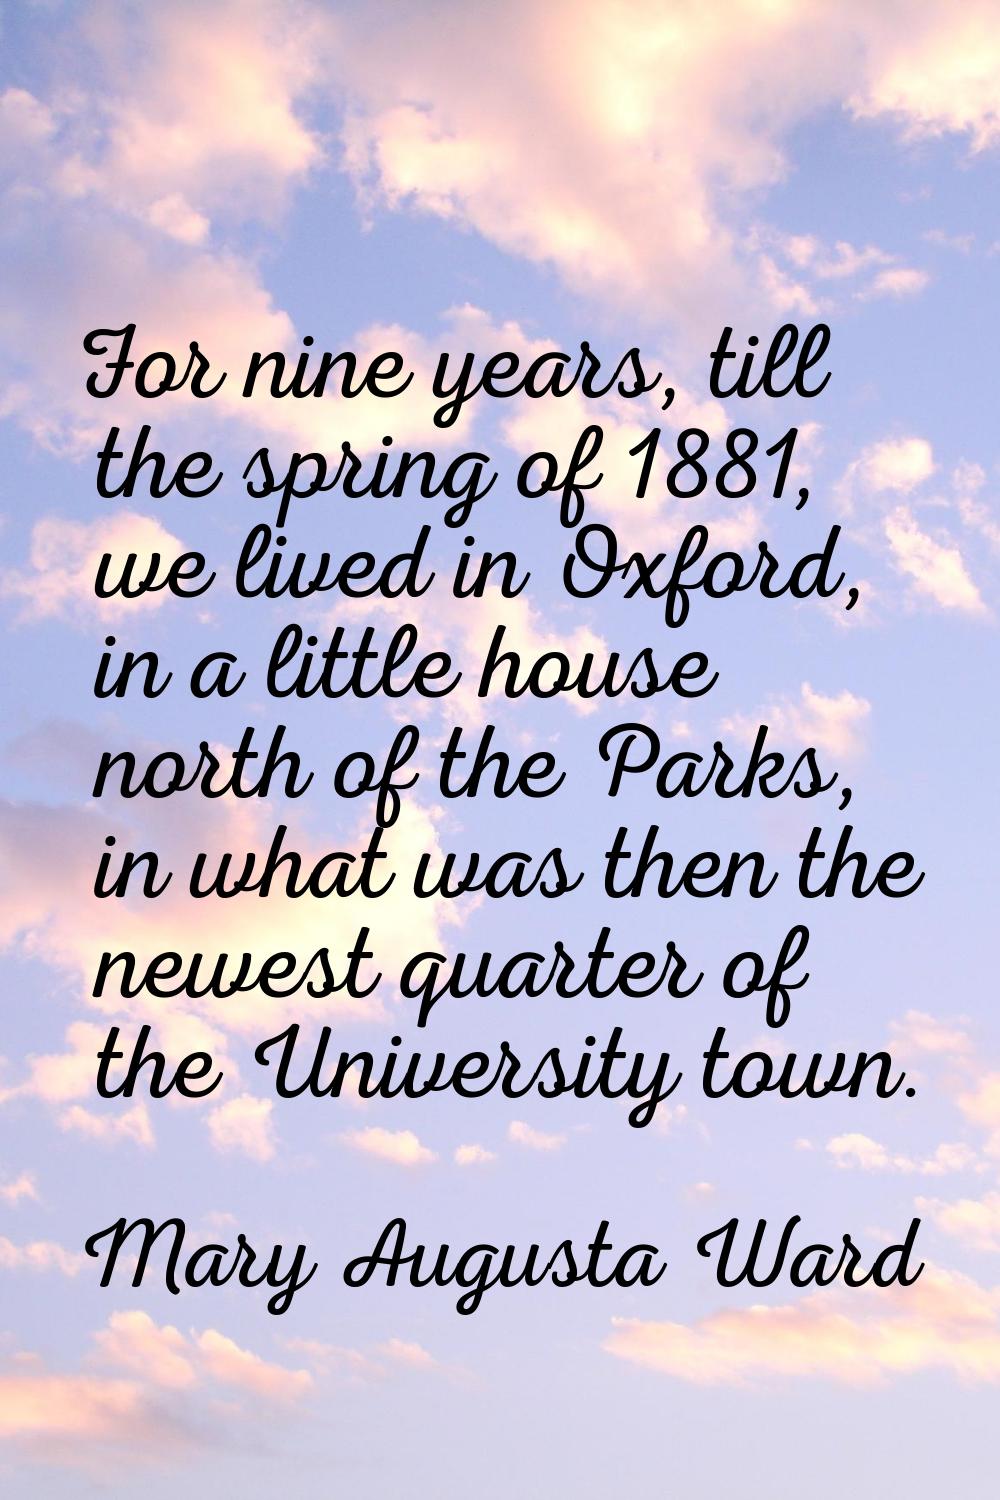 For nine years, till the spring of 1881, we lived in Oxford, in a little house north of the Parks, 